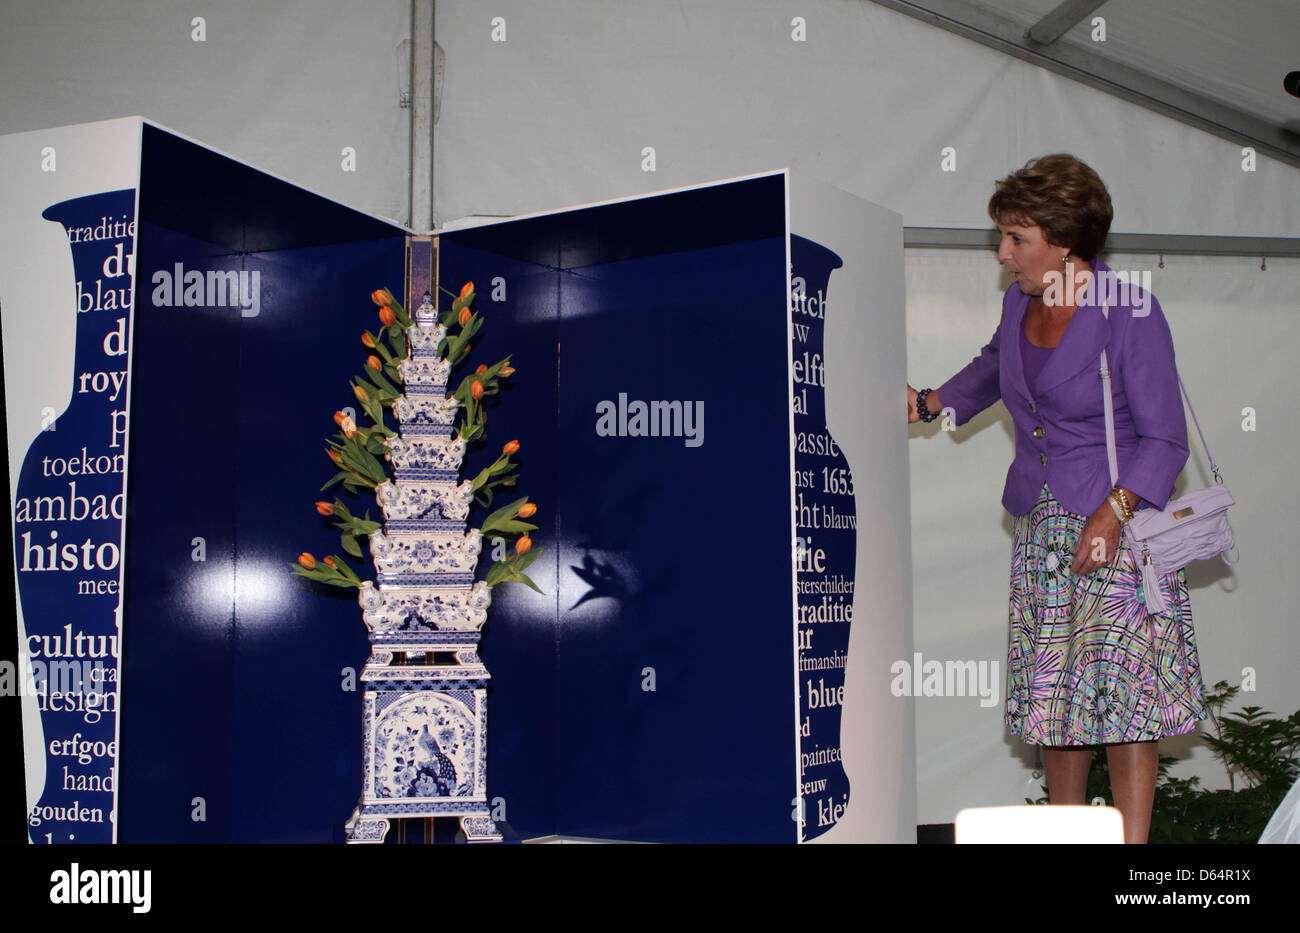 Dutch Princess Margriet HRH Princess Margriet opens the Royal Delft Experience, part of the Royal Delft pottery factory in Delft, Netherlands, 31 March 2012. The Royal Delft Experience is an extension of the old museum of the Royal Delft. It provides an understanding of the emergence of Delftware pottery in the 17th century and its development over the years. Photo: RPE/Albert Phil Stock Photo